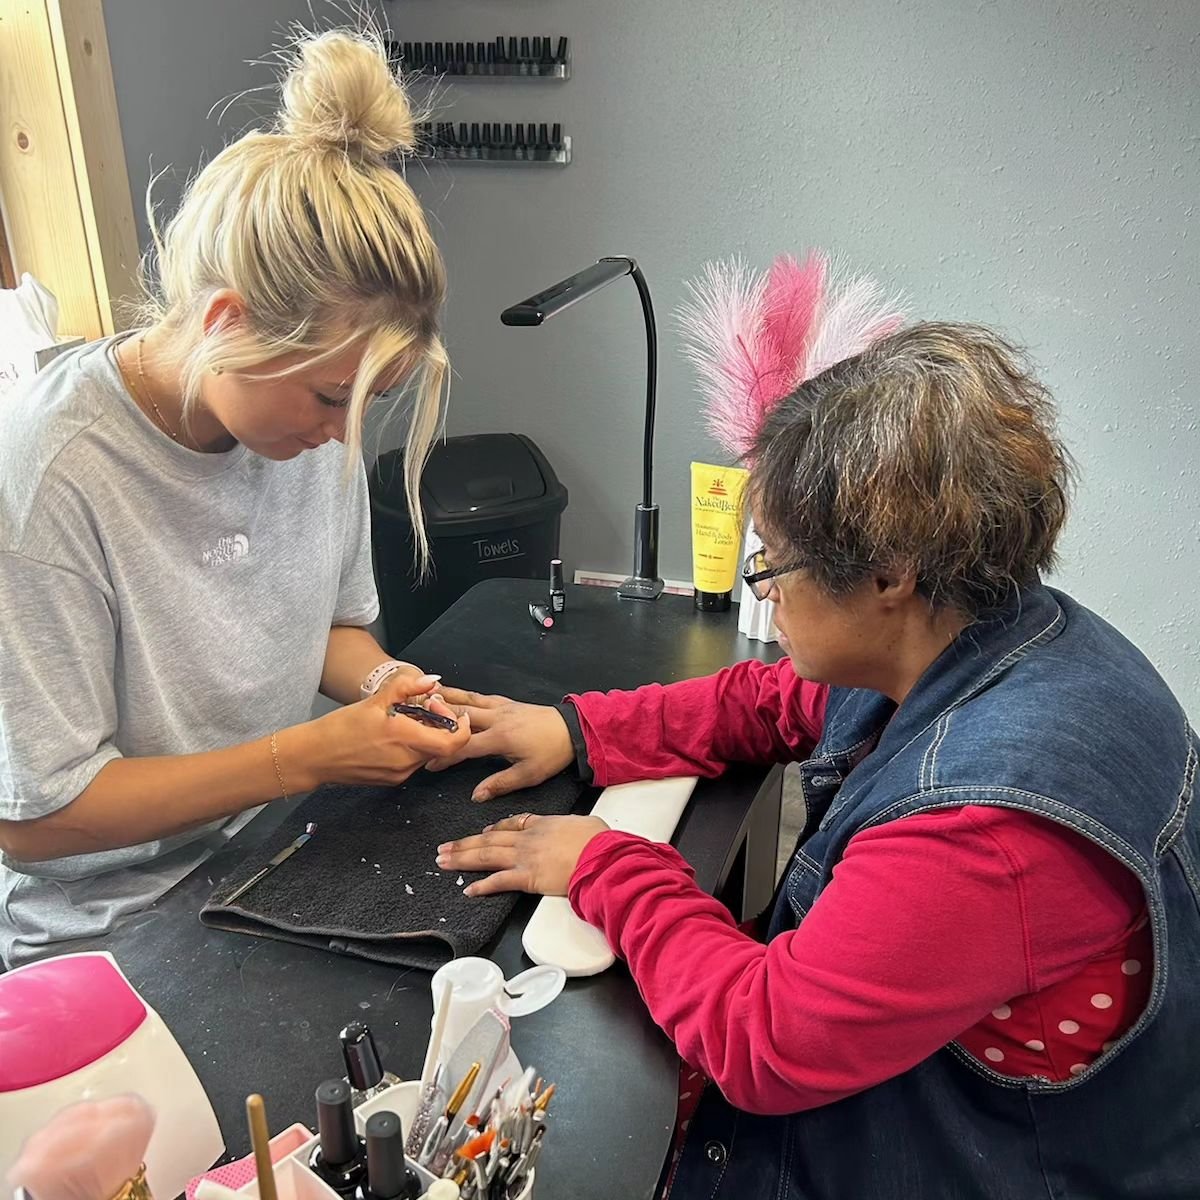 DeDe just loves to get 'gussied' up!
So... when her 1 on 1 support friend takes her out, getting her nails done is her favorite!

Liz at @modernrosesalon is so amazing and really puts beautiful care into DeDe 🥰